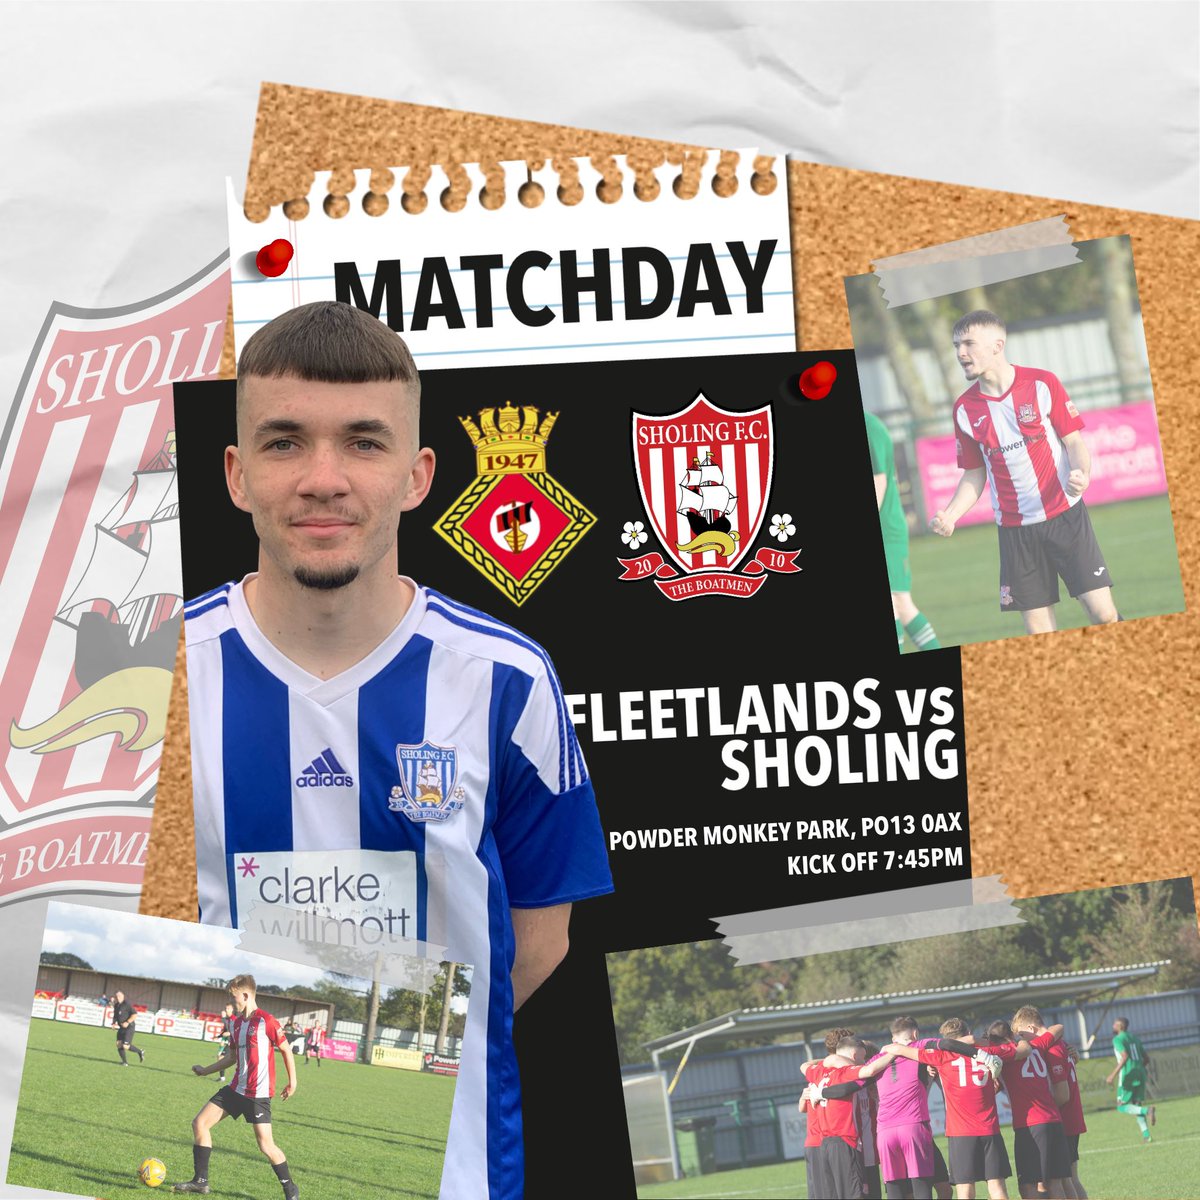 MATCH DAY!

The young Boatmen make the short trip to the PO side of Hampshire for a match against ever-improving @FleetlandsResFc

🏟️ Powder Monkey Park
📍Lederle Lane, PO13 0AX
⌚ 19:45

#UpTheBoatmen
🔴⚪